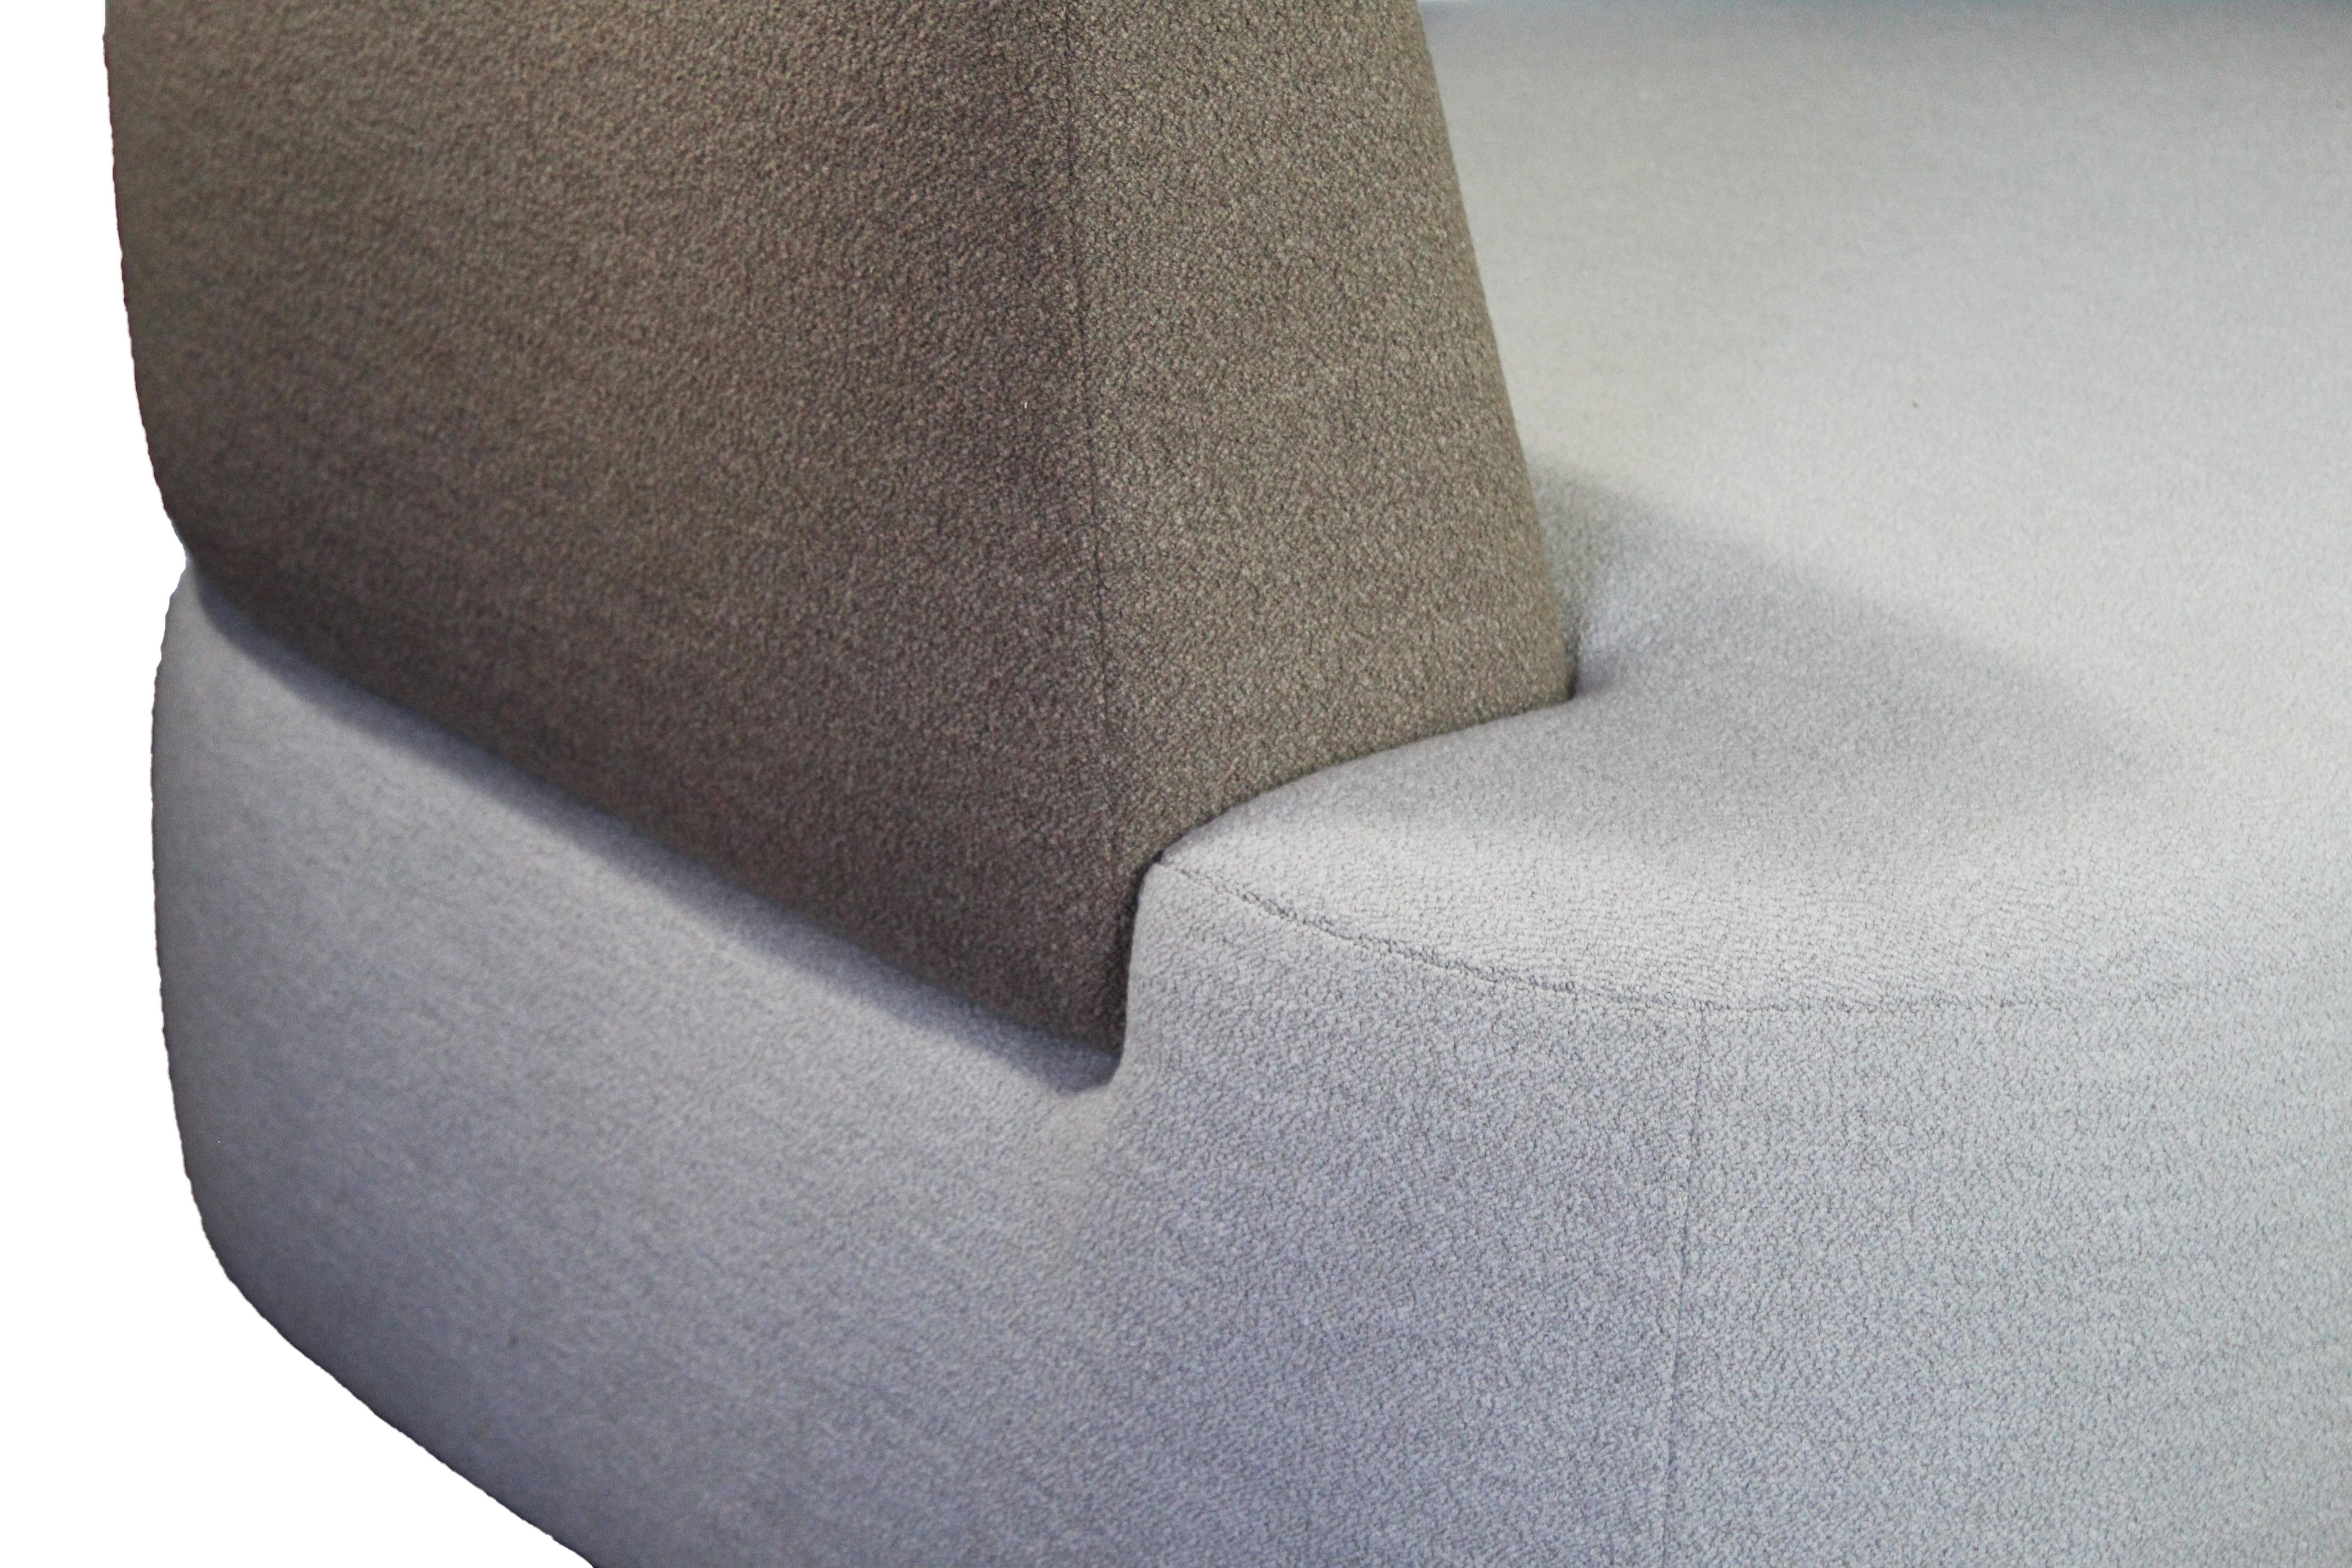 Hand-Crafted Bespoke Organic Sofa Pierre in Blue and Brown Wool by Eric Gizard, for Kenfulk